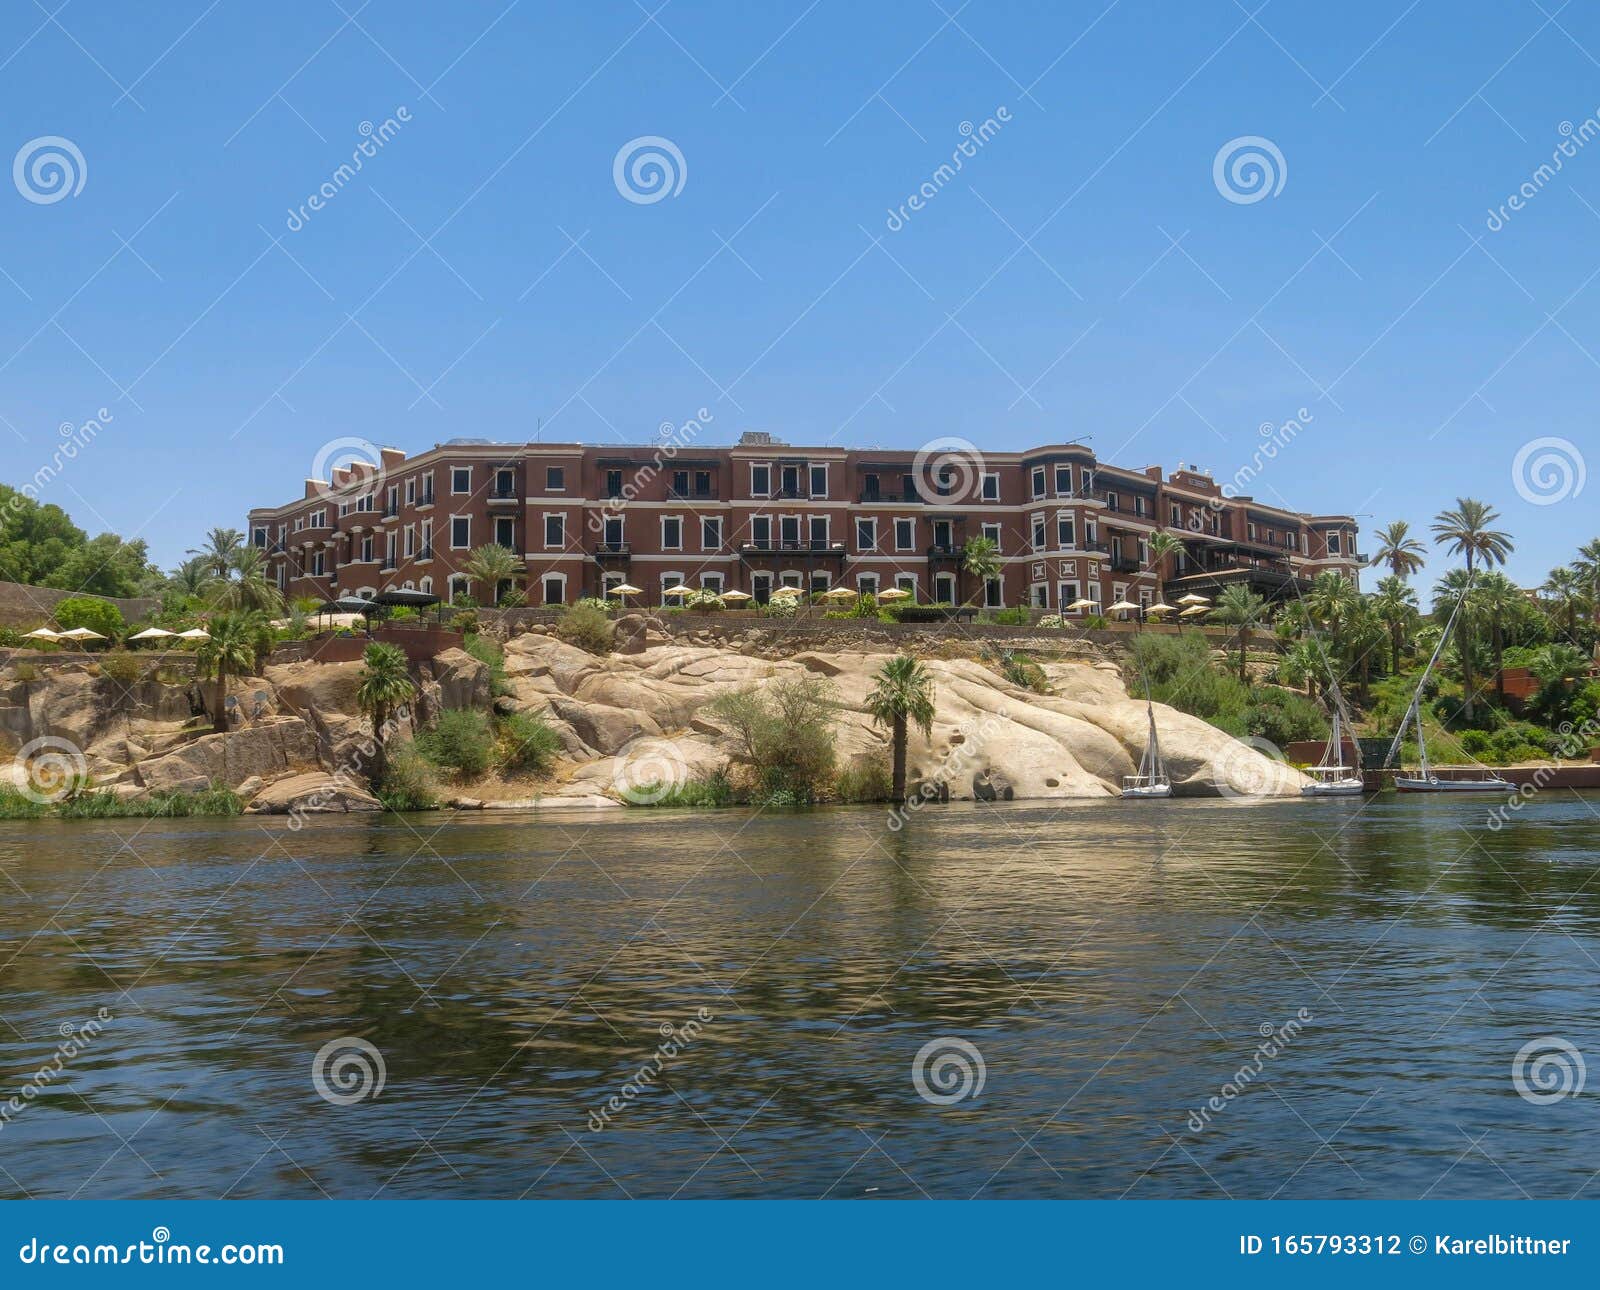 a view from a boat on a three-story building with a brown facade on the shore of lake nasser in egypt. architecturally nice